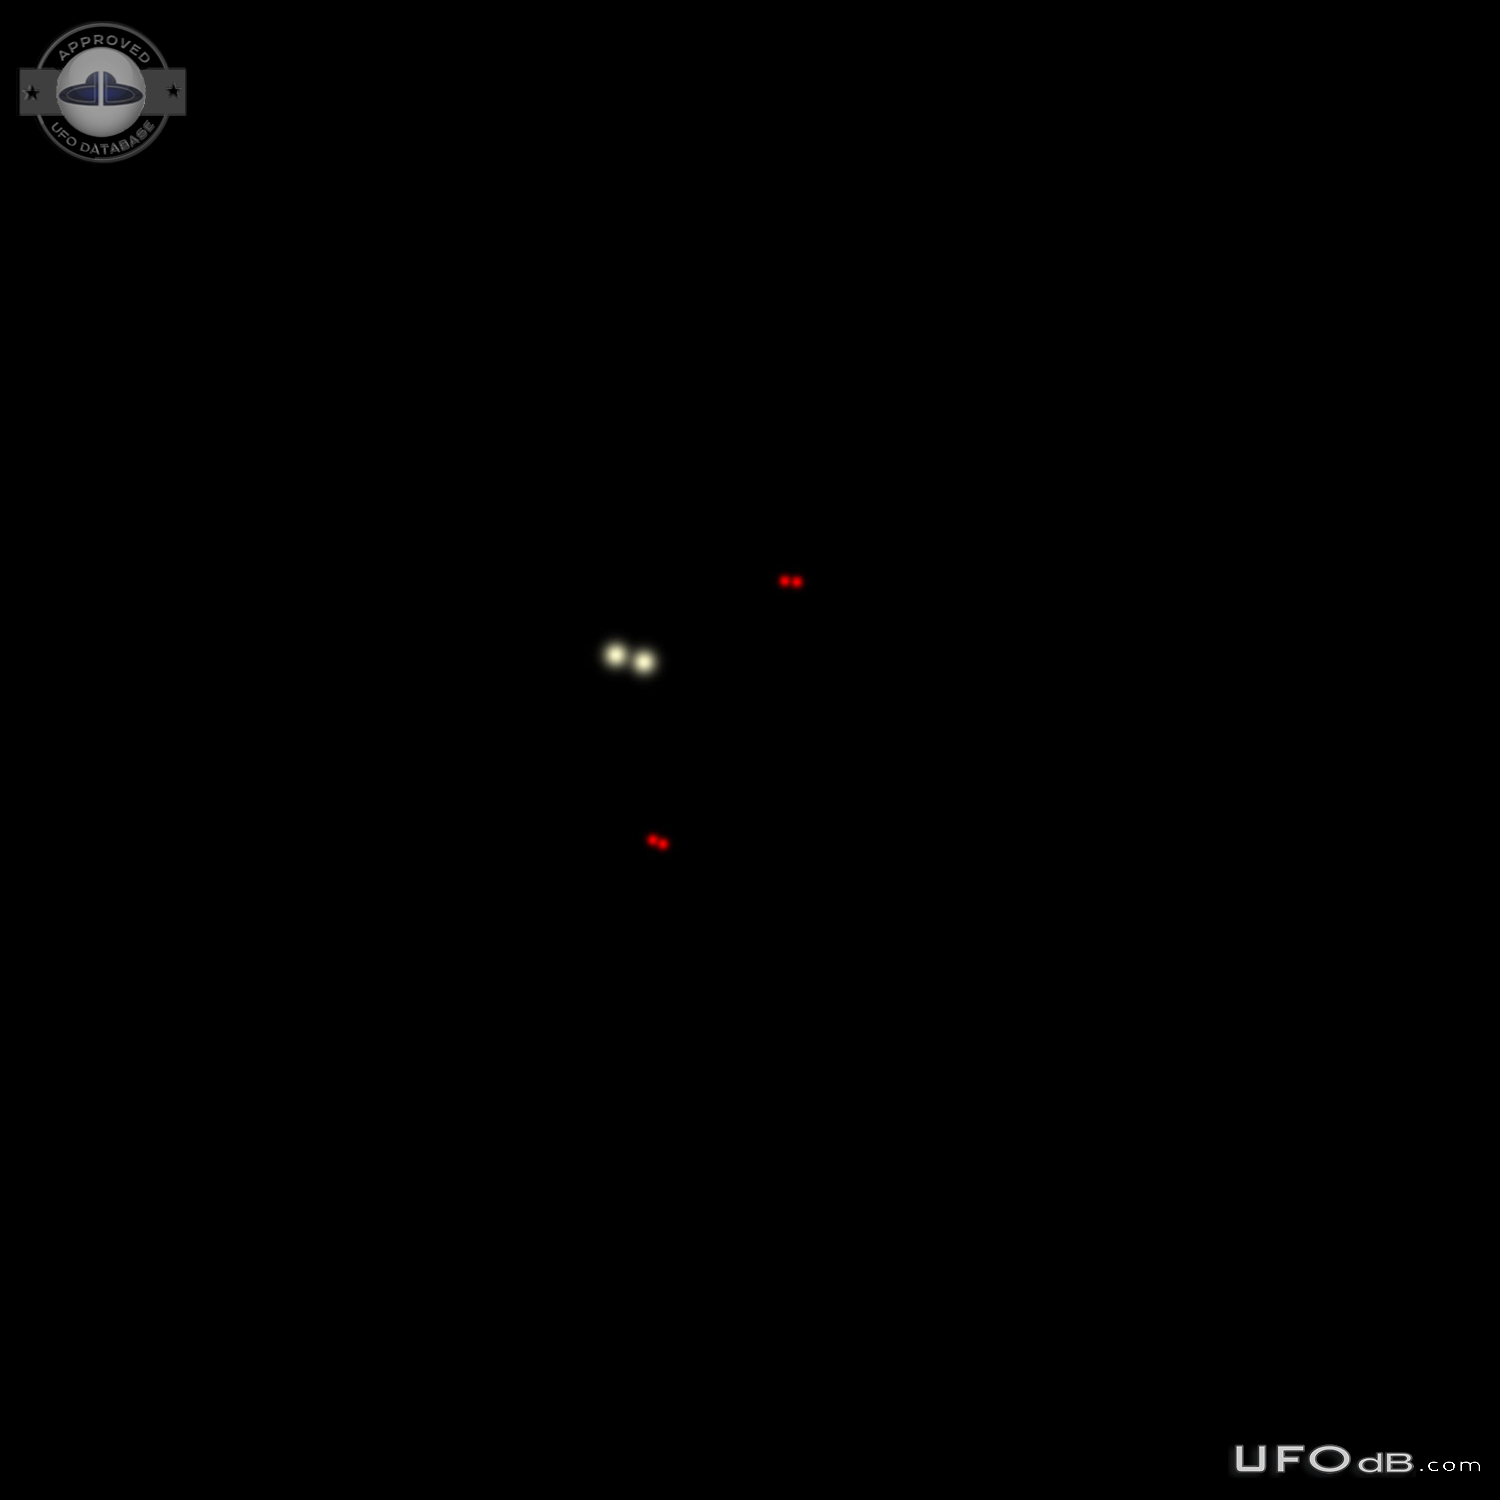 Silent object being followed by jet - Norwich Norfolk England 2015 UFO Picture #763-3